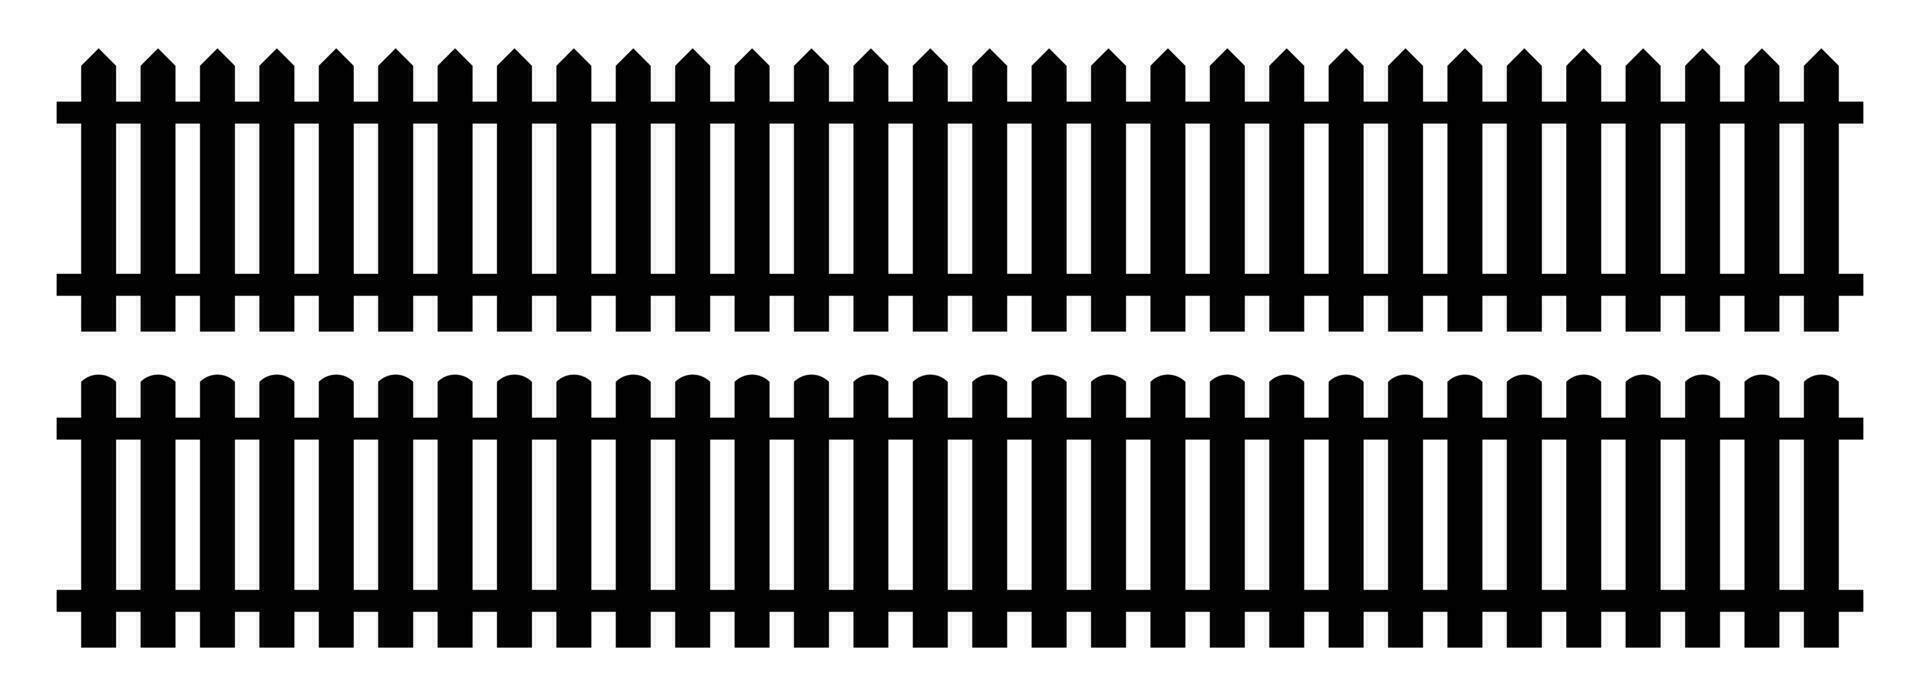 Set of fence silhouette in flat style vector illustration. Black fence isolated on white